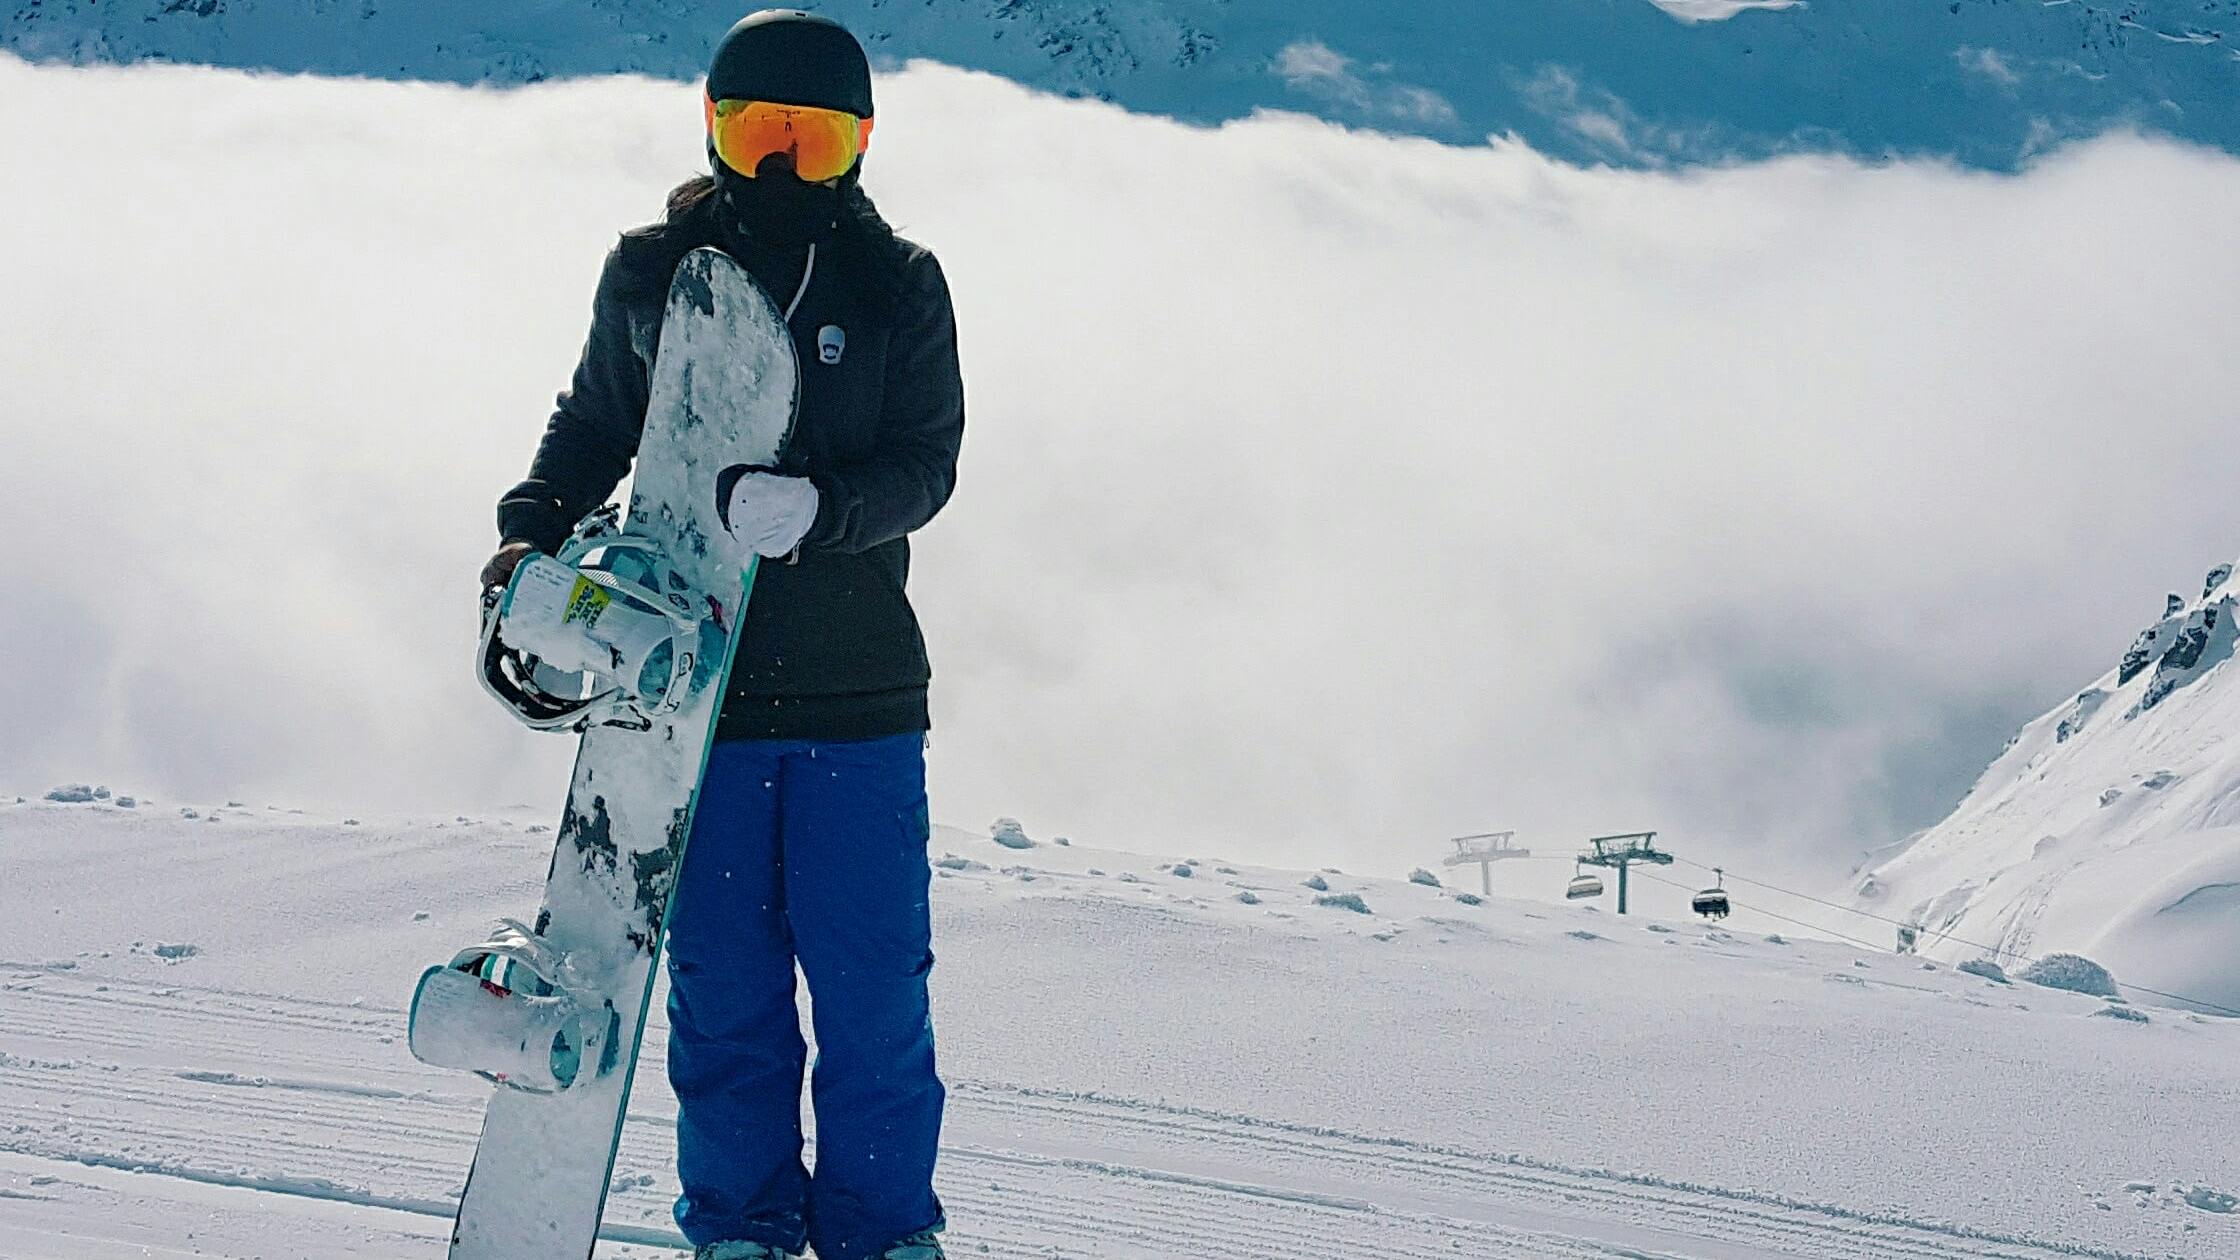 A snowboarder in a black jacket and blue pants looks at the camera